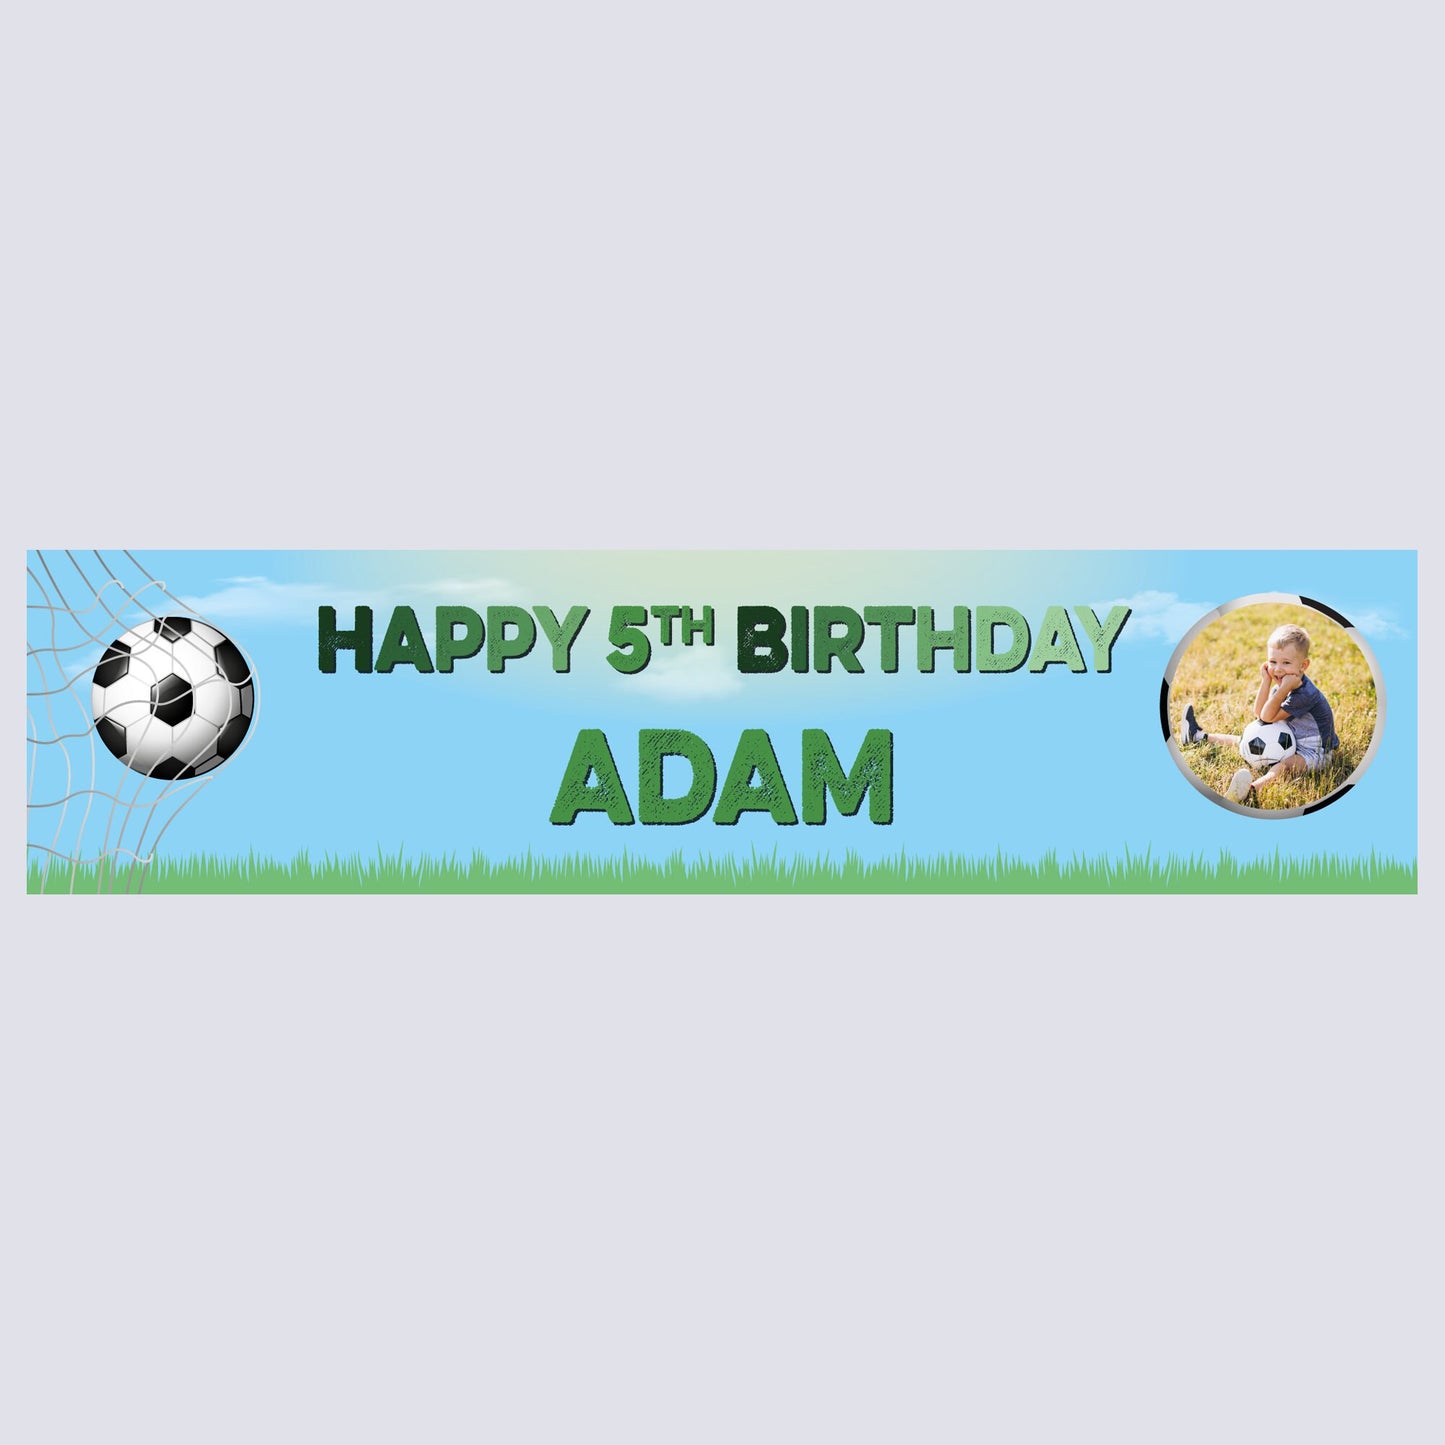 Personalised Banner - Football Banner with Photo Personalised Football Banner